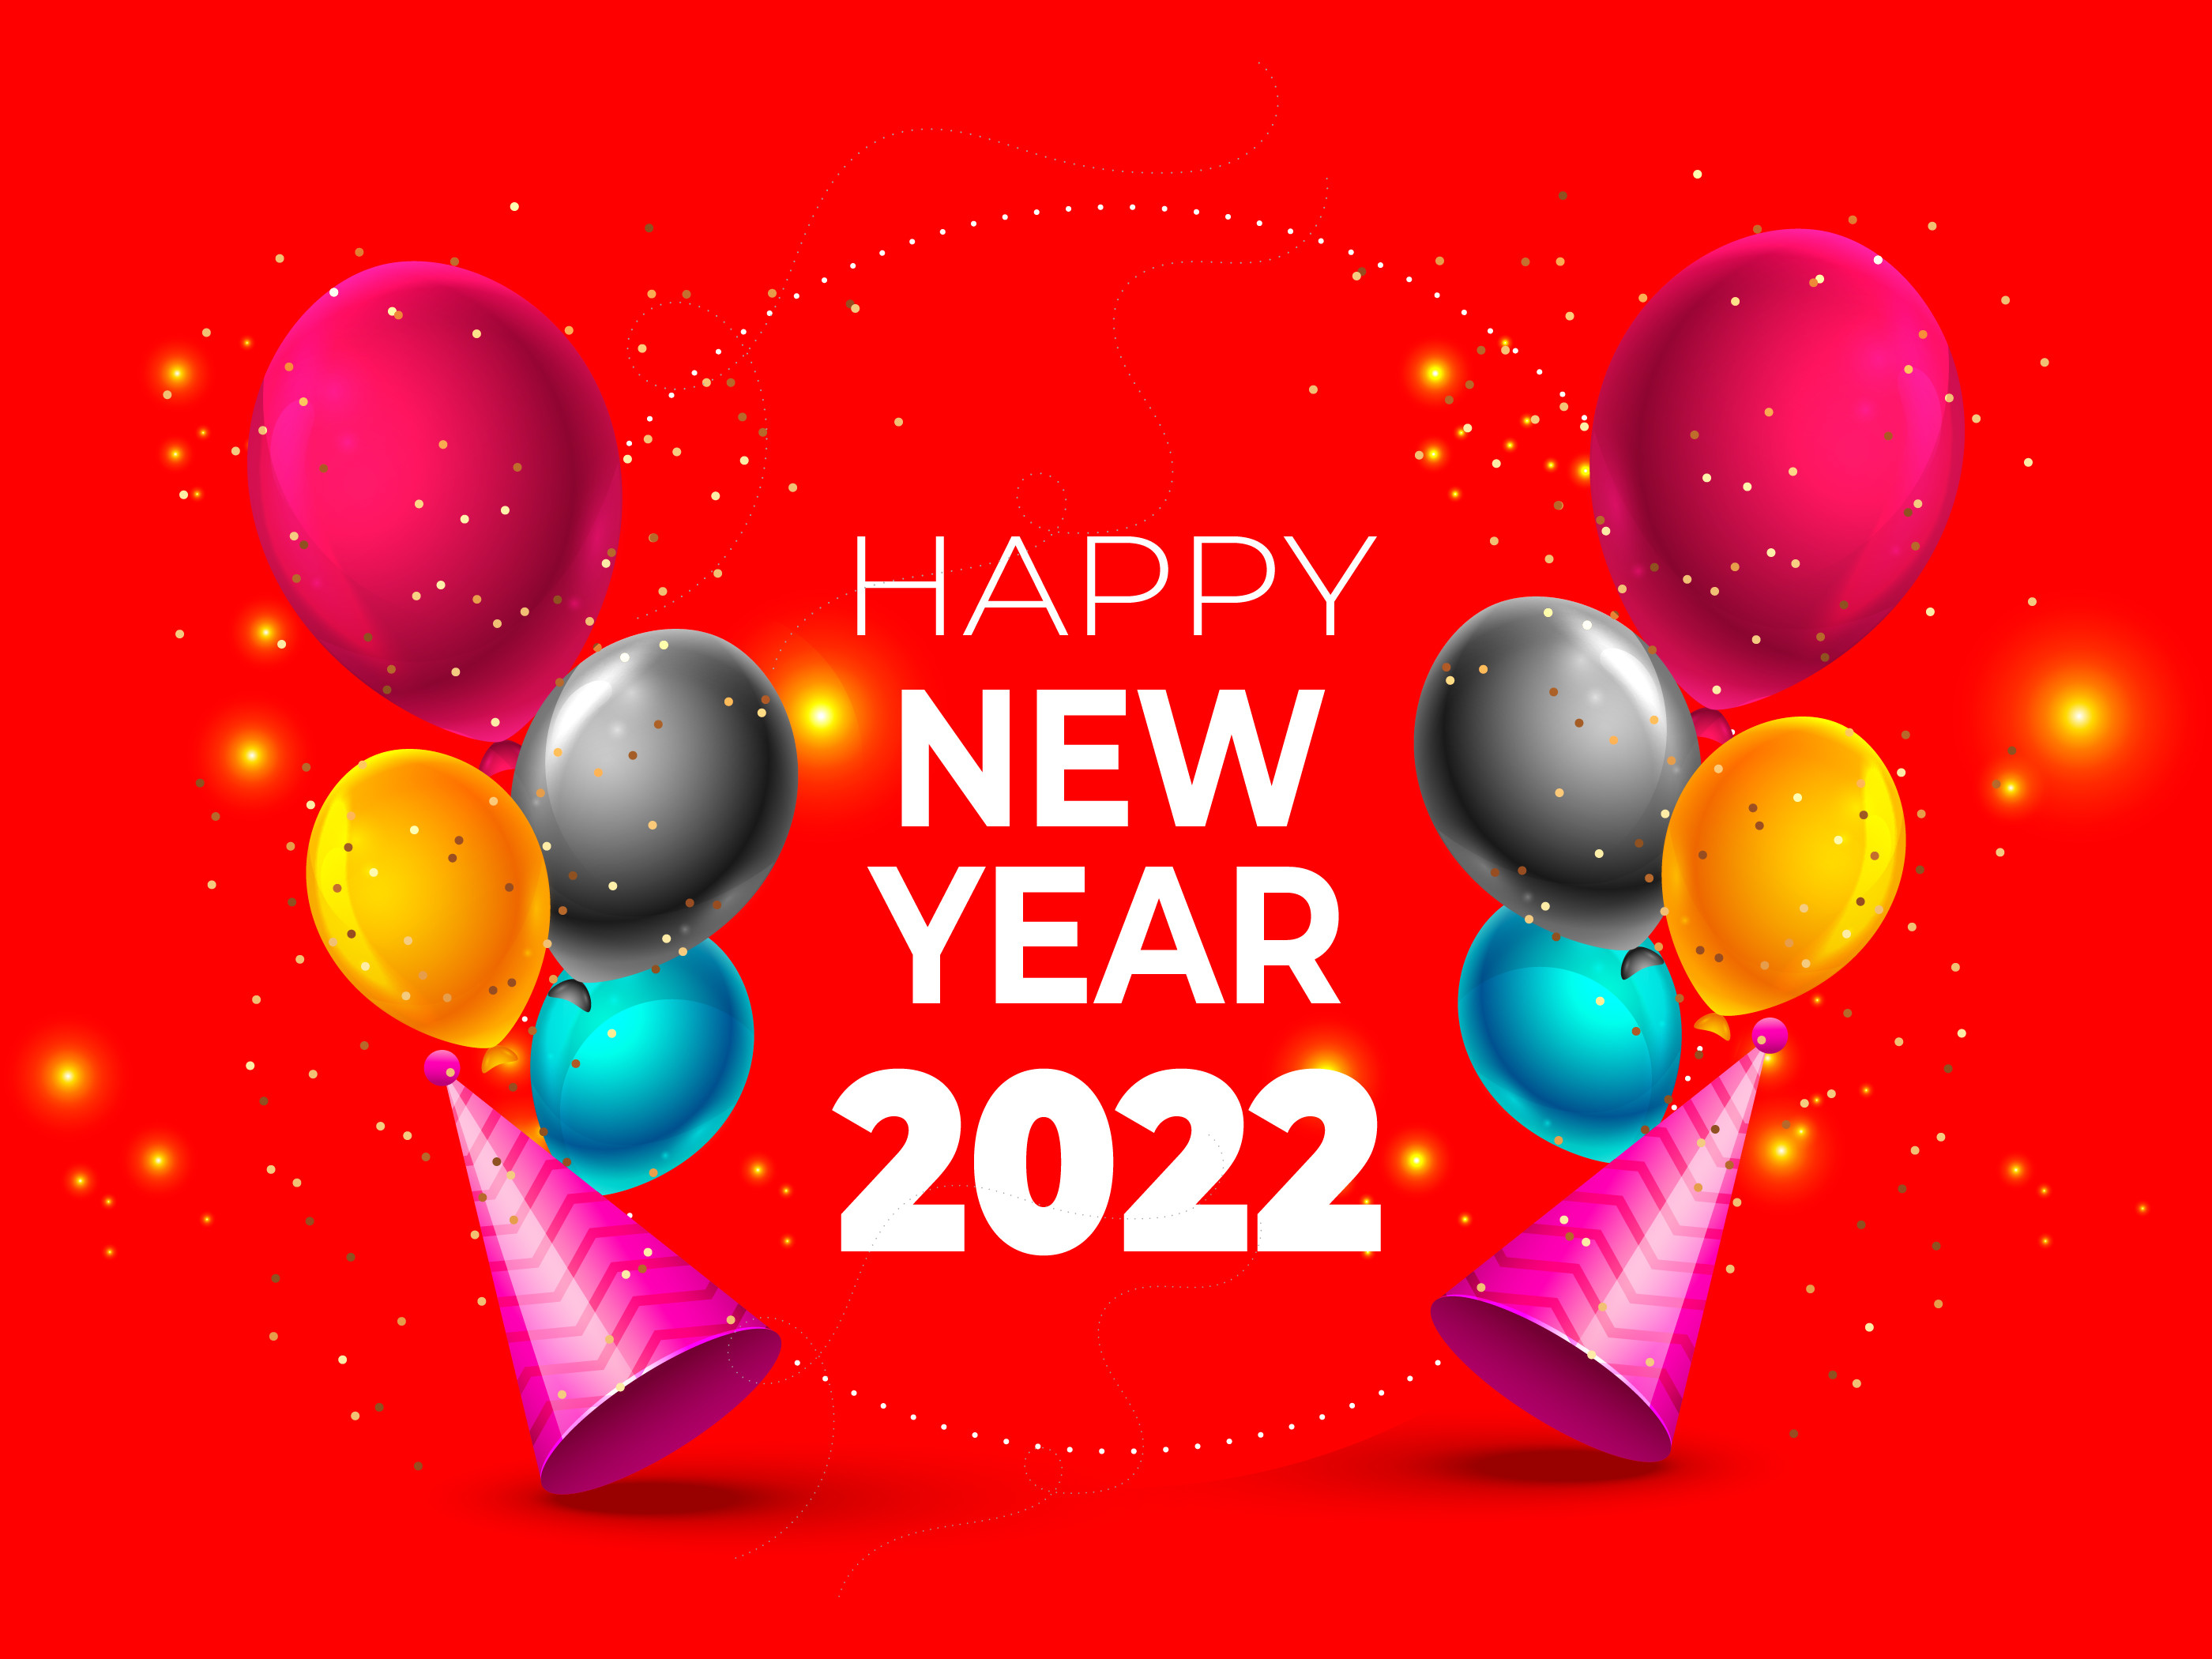 Happy New Year 2022 Background Graphics 16358699 1